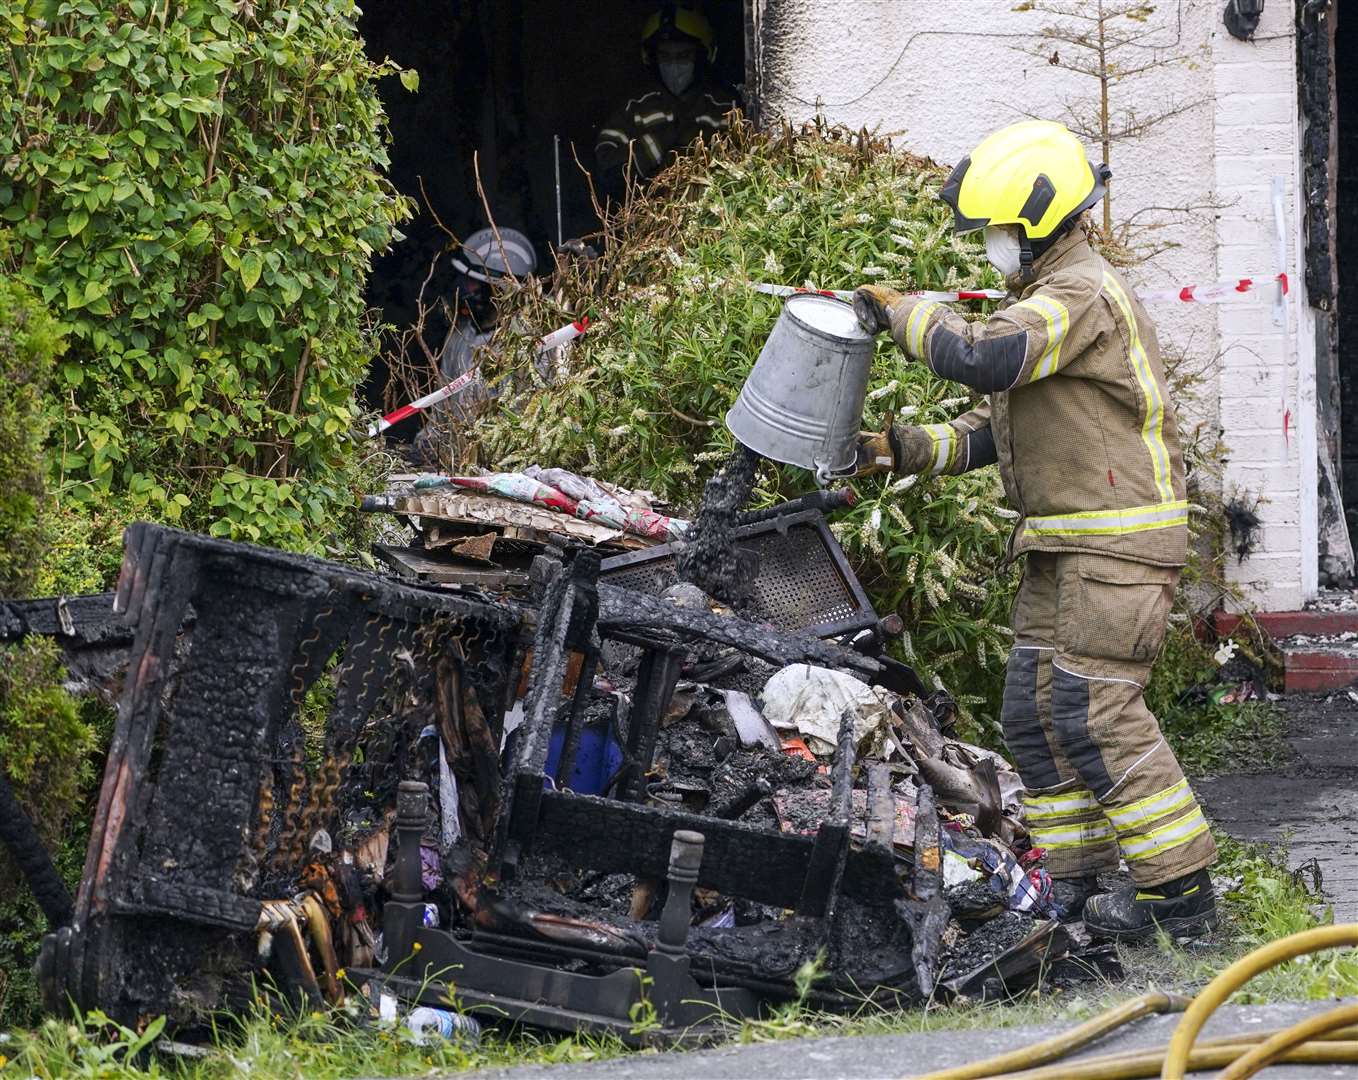 Firefighters worked to clear debris from the incident on Saturday (Steve Parsons/PA)